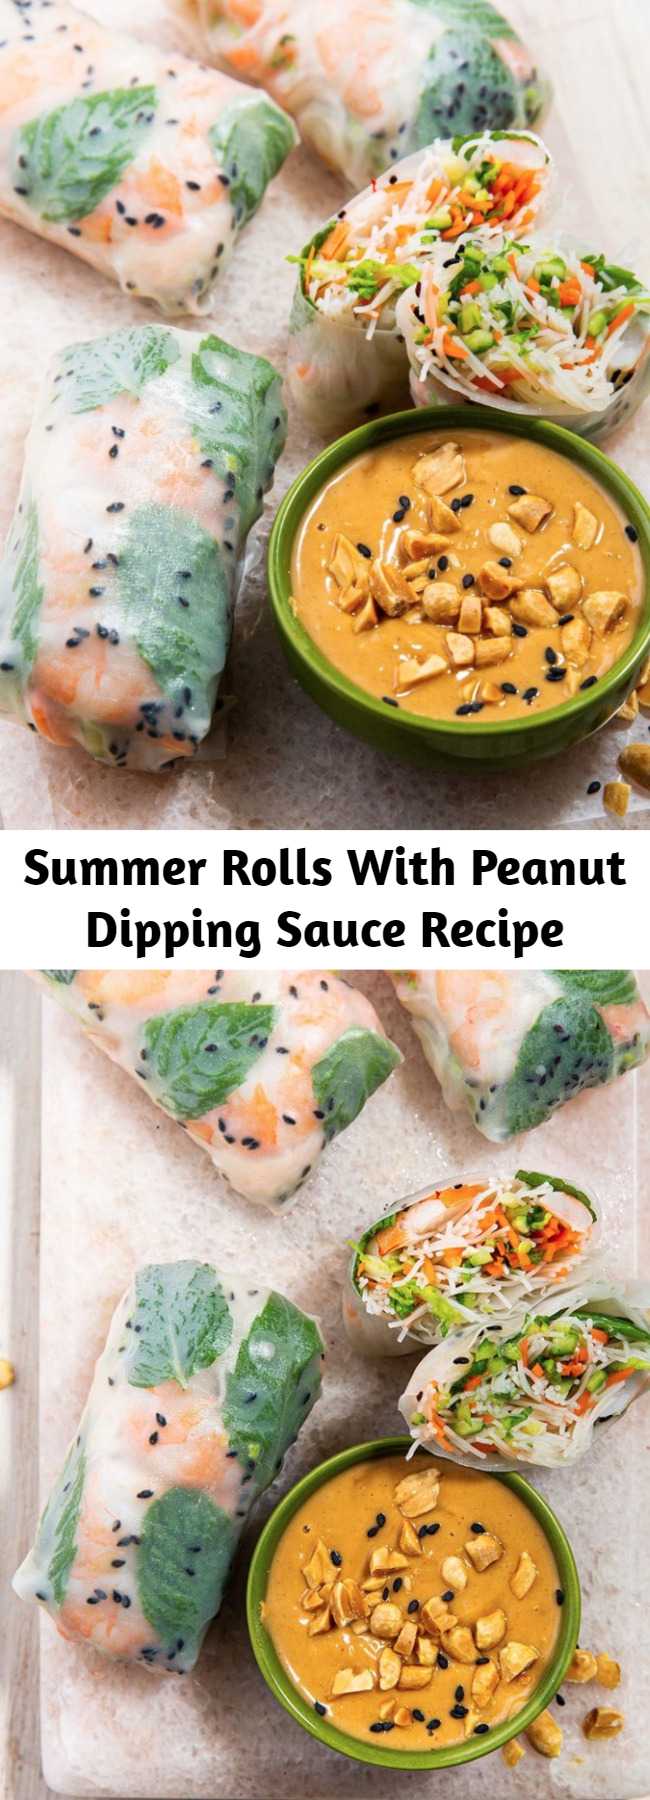 Summer Rolls With Peanut Dipping Sauce Recipe - No need to wait for summer to enjoy these bad boys! Brimming with shrimp, carrot, cucumbers, cabbage, and fresh herbs AND paired with a peanut dipping sauce, these will disappear right away at any party or gathering. They're incredibly refreshing!